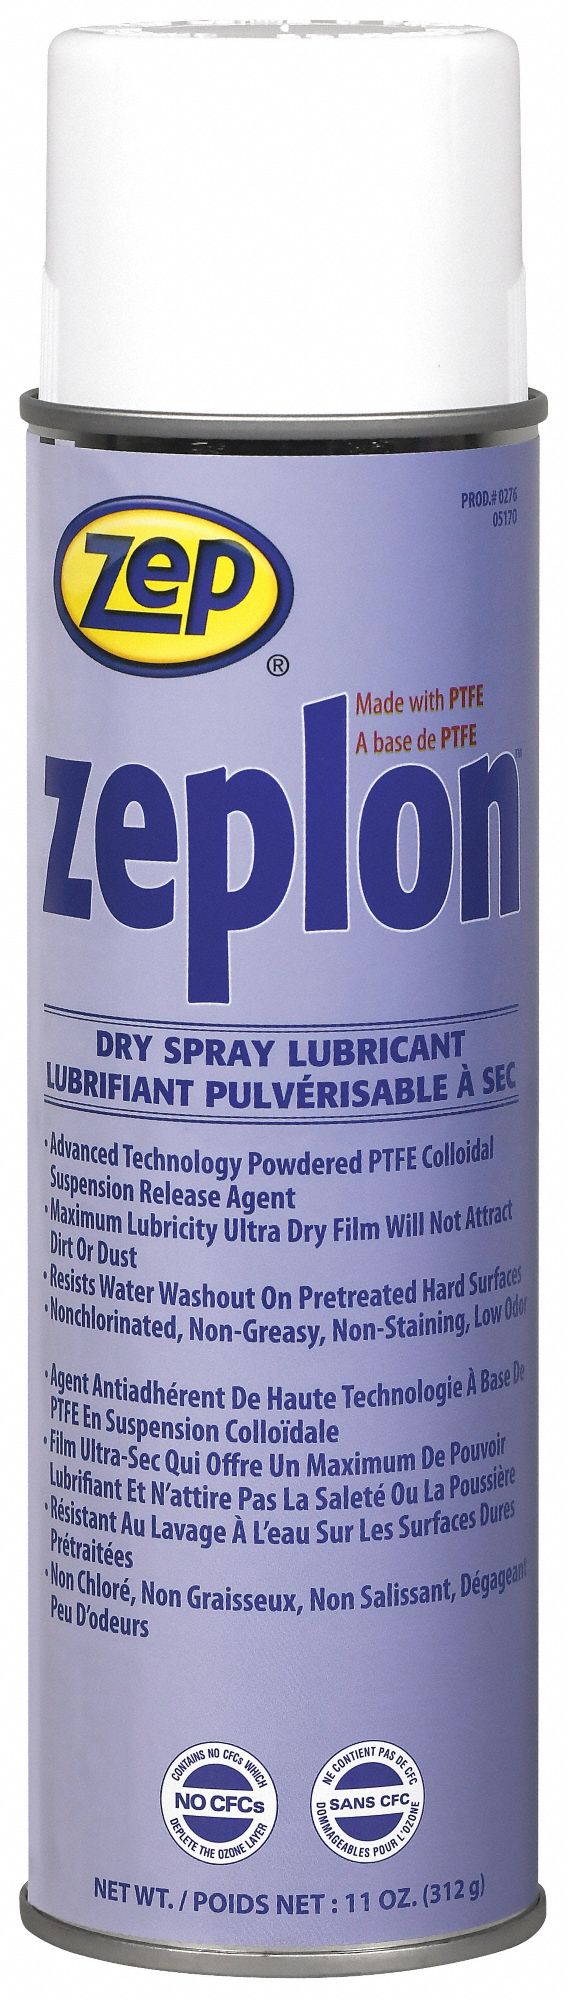 Zep General Purpose Dry Lubricant 50 To 500 F No Additives Net Fill 11 Oz Aerosol Can Pk 12 456l Grainger